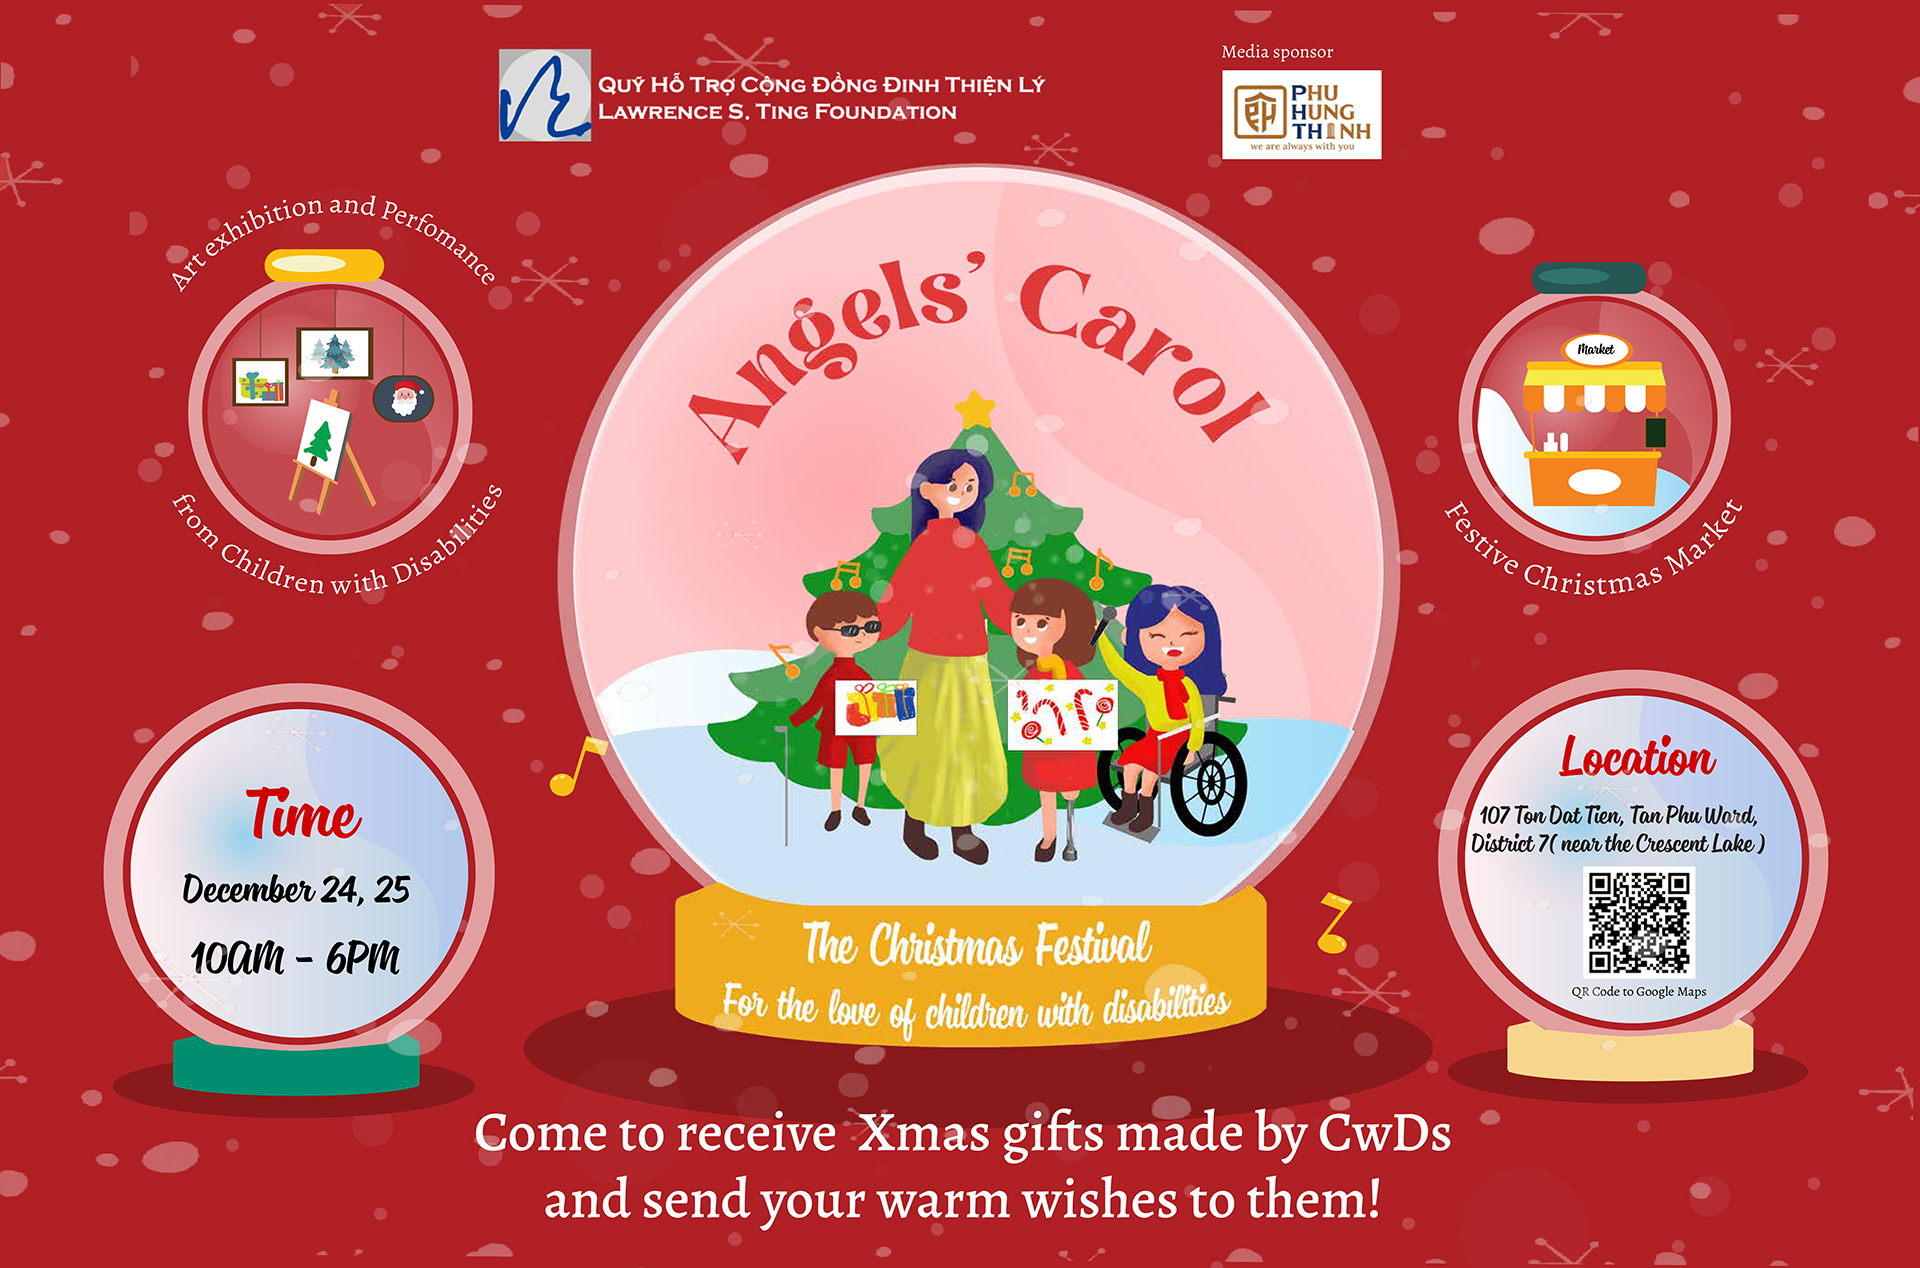 Christmas Event for Children with Disabilities: “Songs from the Angels”